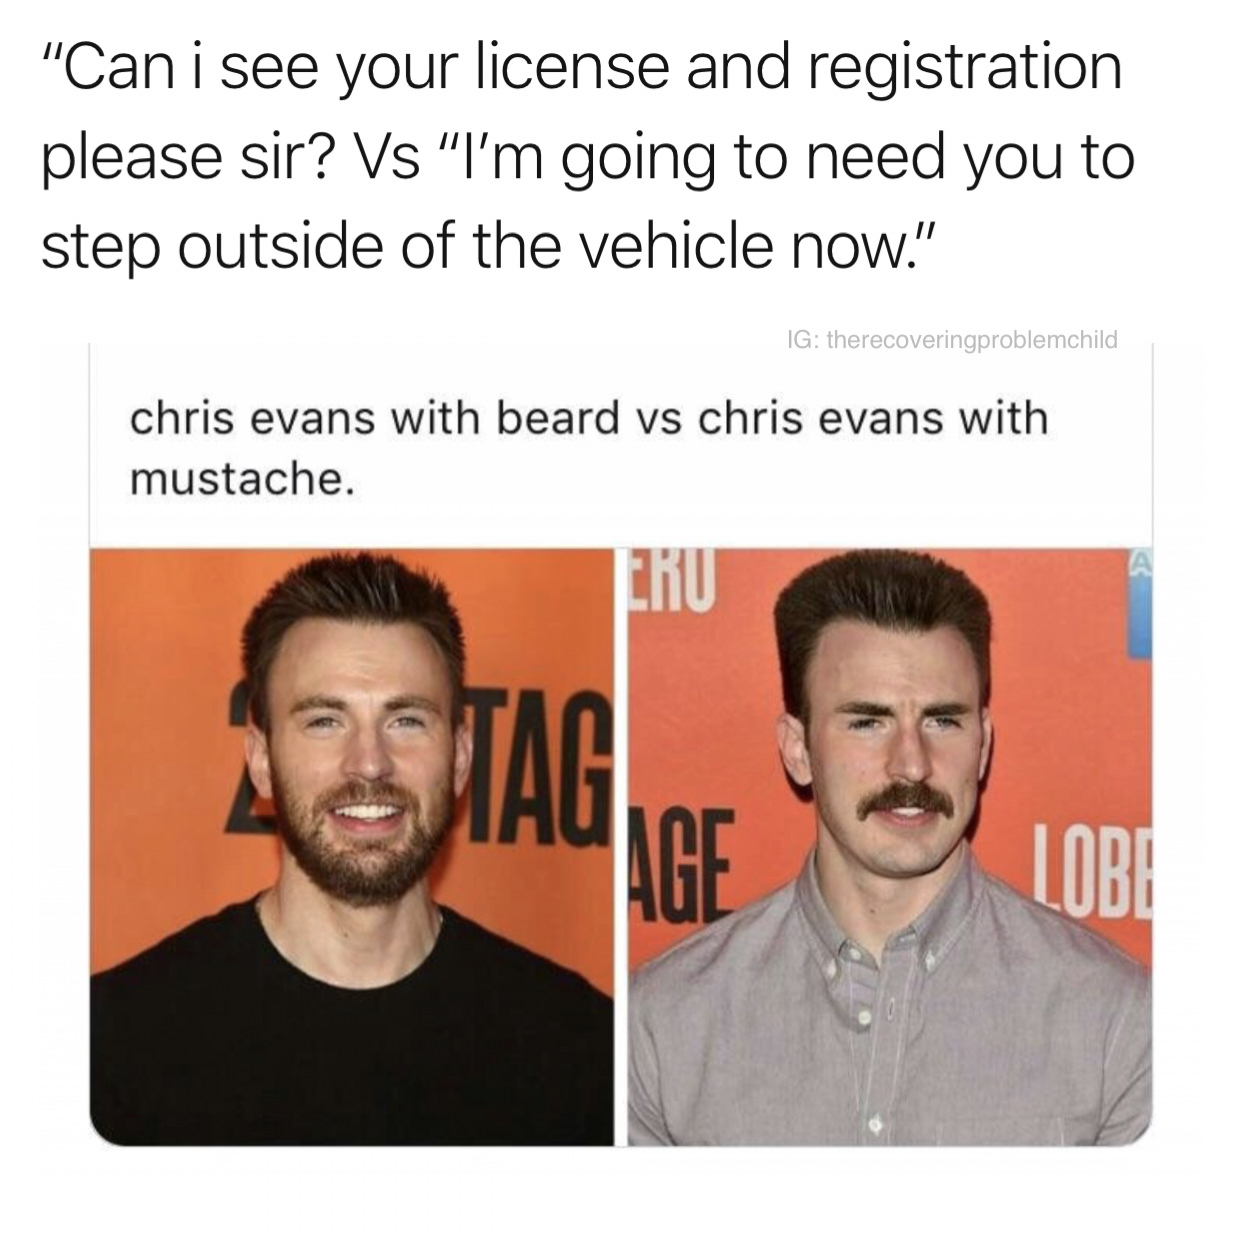 chris evans send pictures of spiderman - "Can i see your license and registration please sir? Vs "I'm going to need you to step outside of the vehicle now." Ig therecoveringproblemchild chris evans with beard vs chris evans with mustache. Awag.